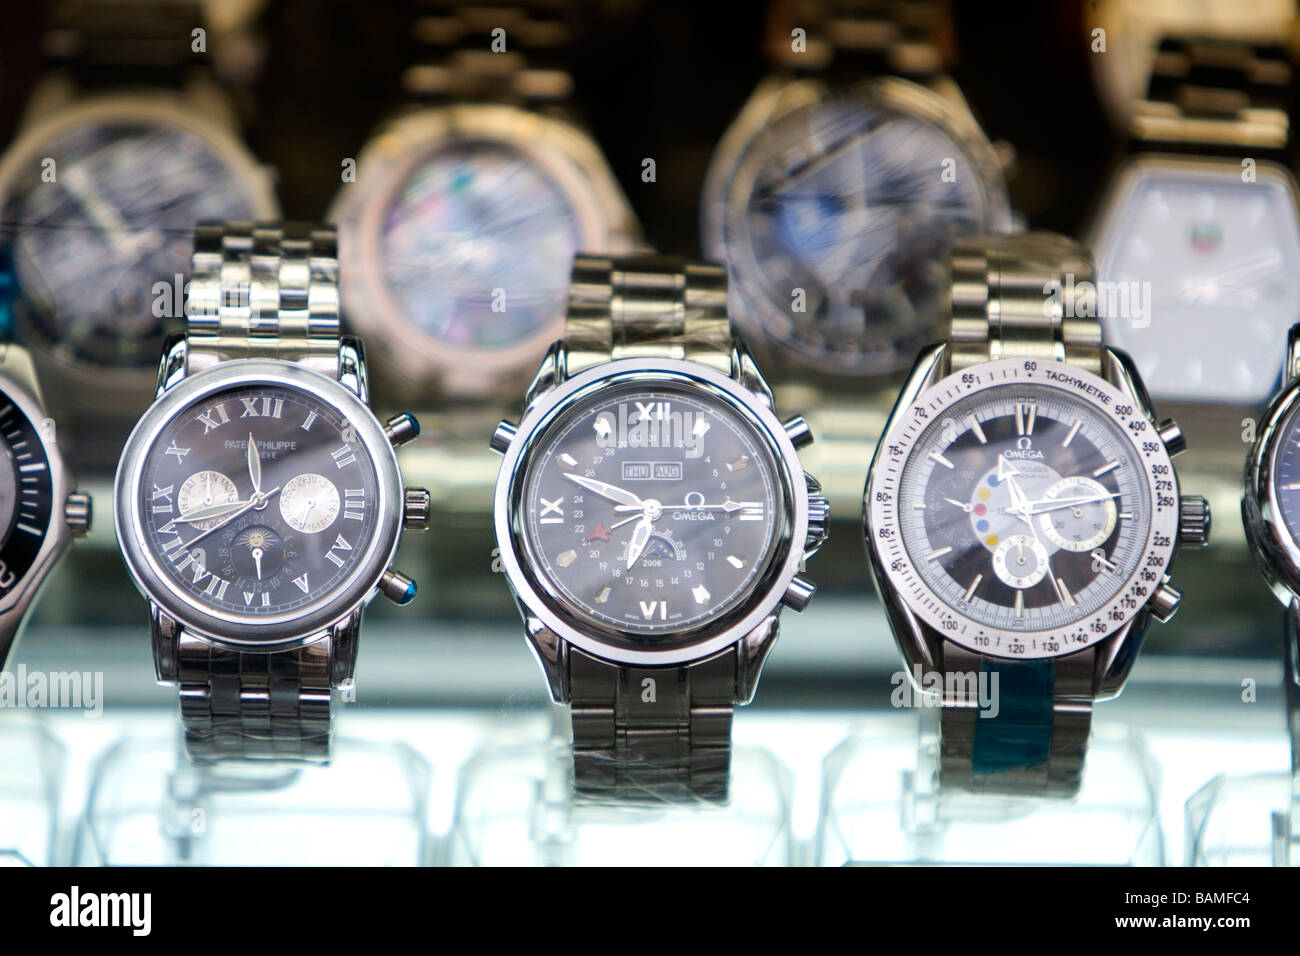 Store window display of watches in Ho Chi Minh City Vietnam Stock Photo